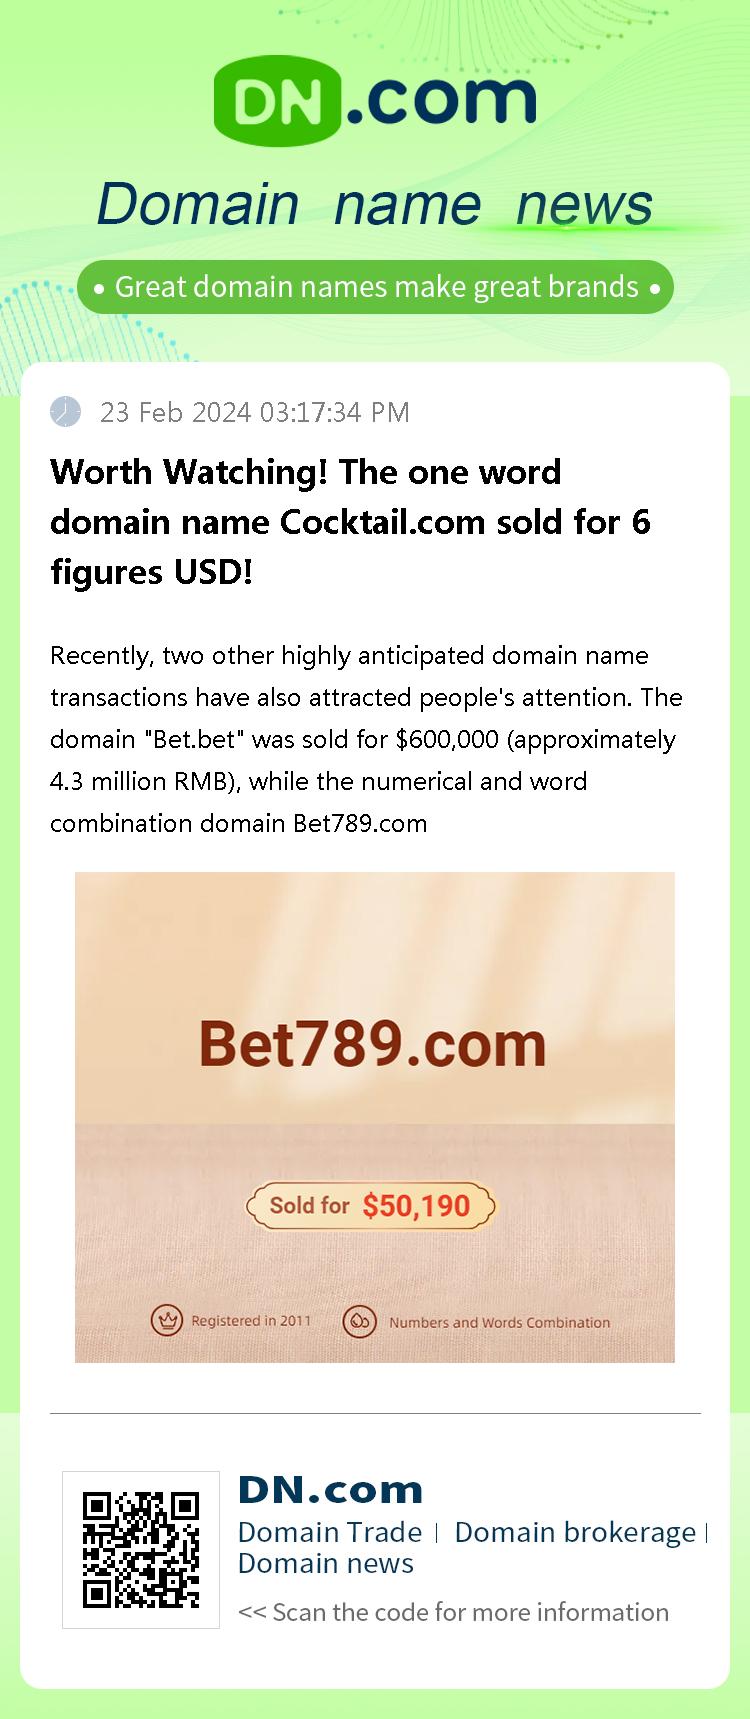 Worth Watching! The one word domain name Cocktail.com sold for 6 figures USD!